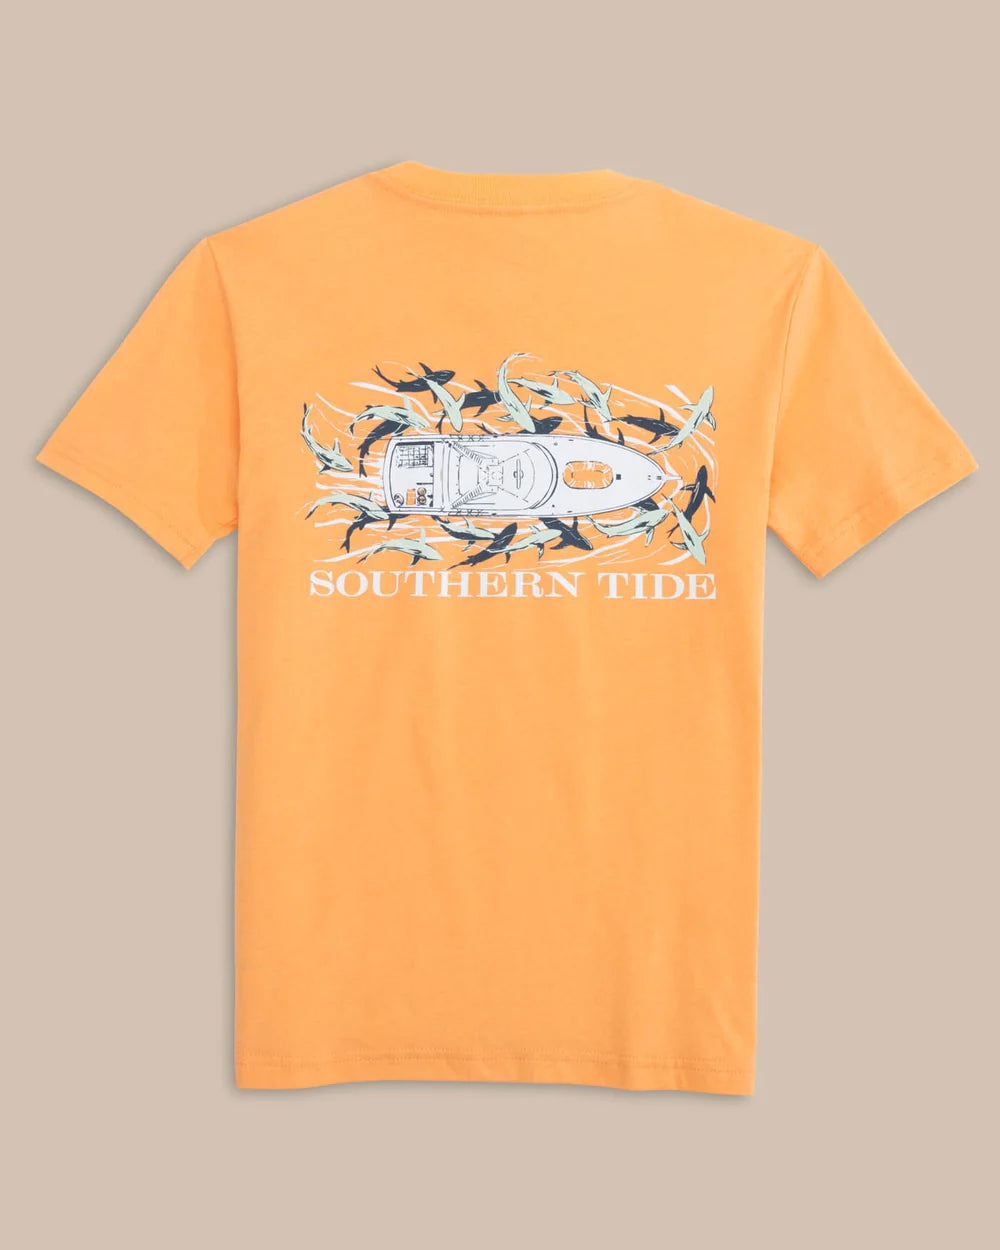 Southern Tide Yachts of Sharks Tee